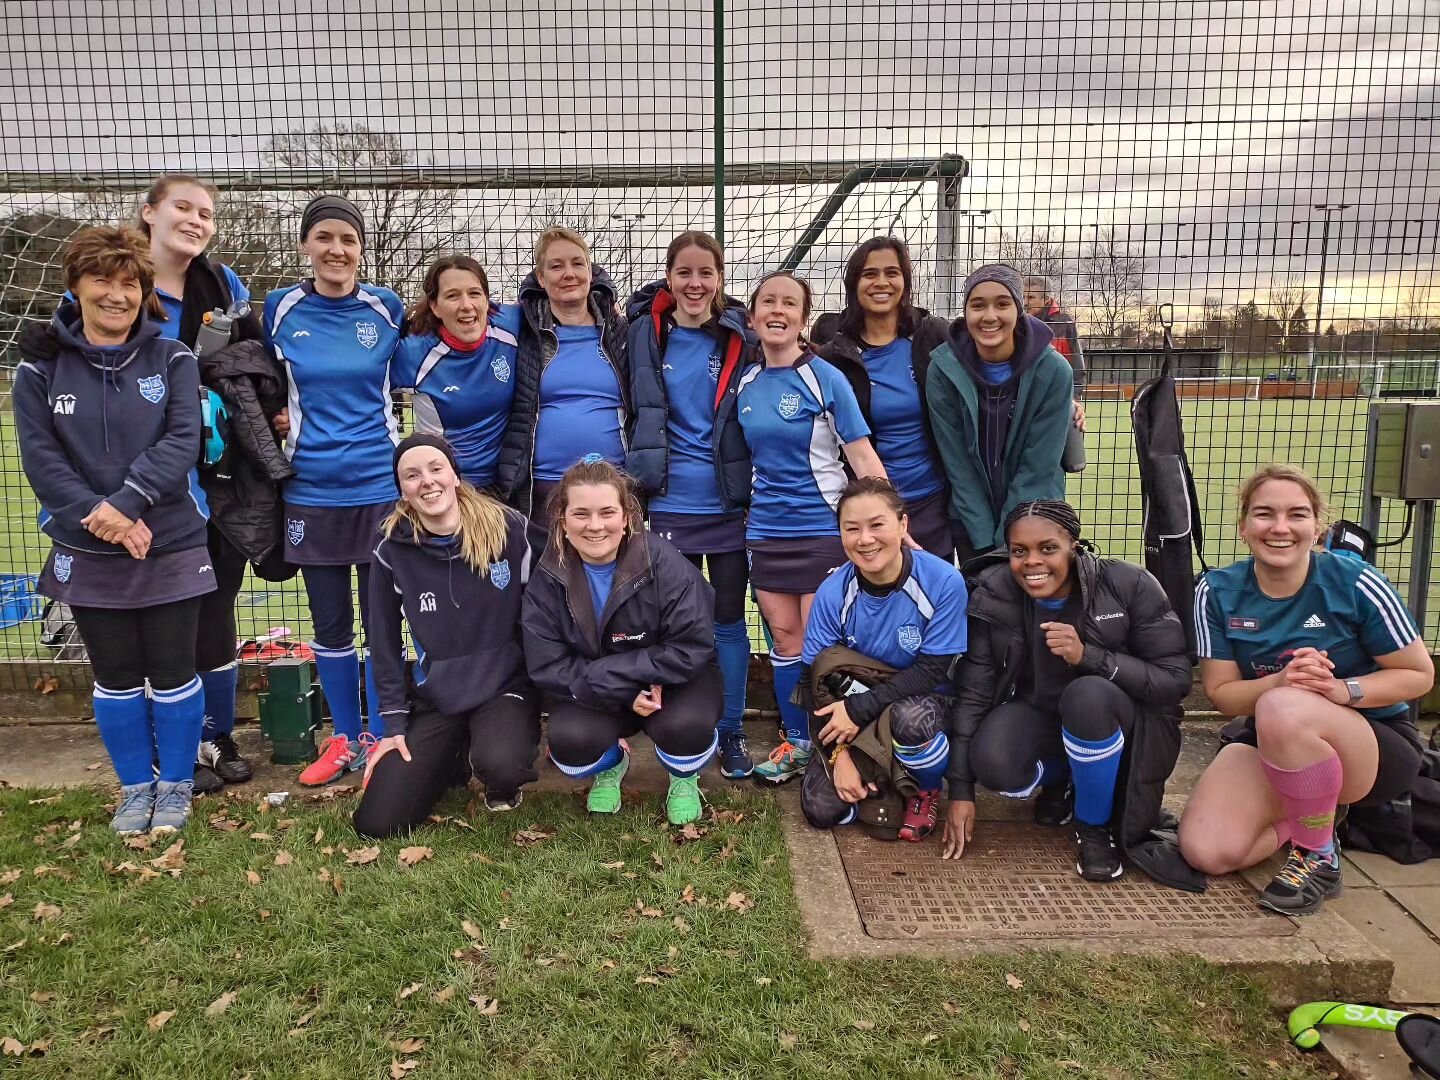 Our 2s after a strong 3-2 victory!